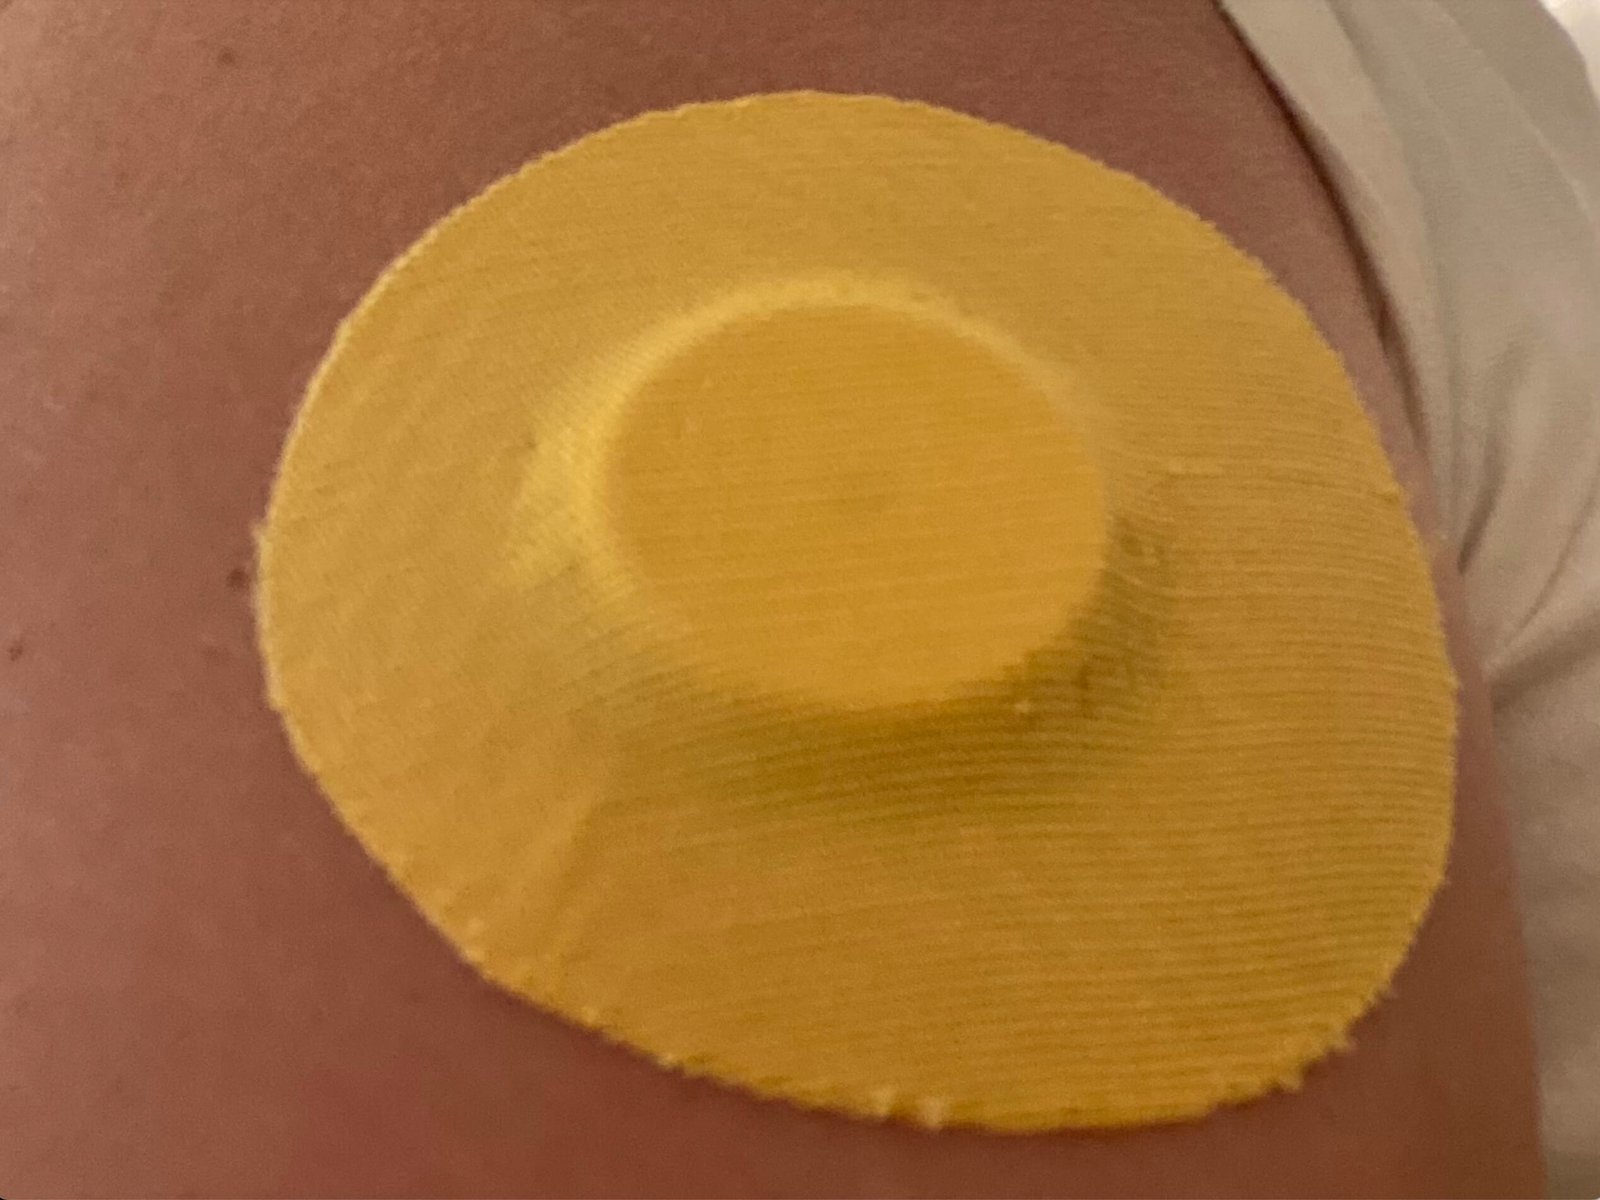 Read more about the article Skin Grip’s Adhesive Patches